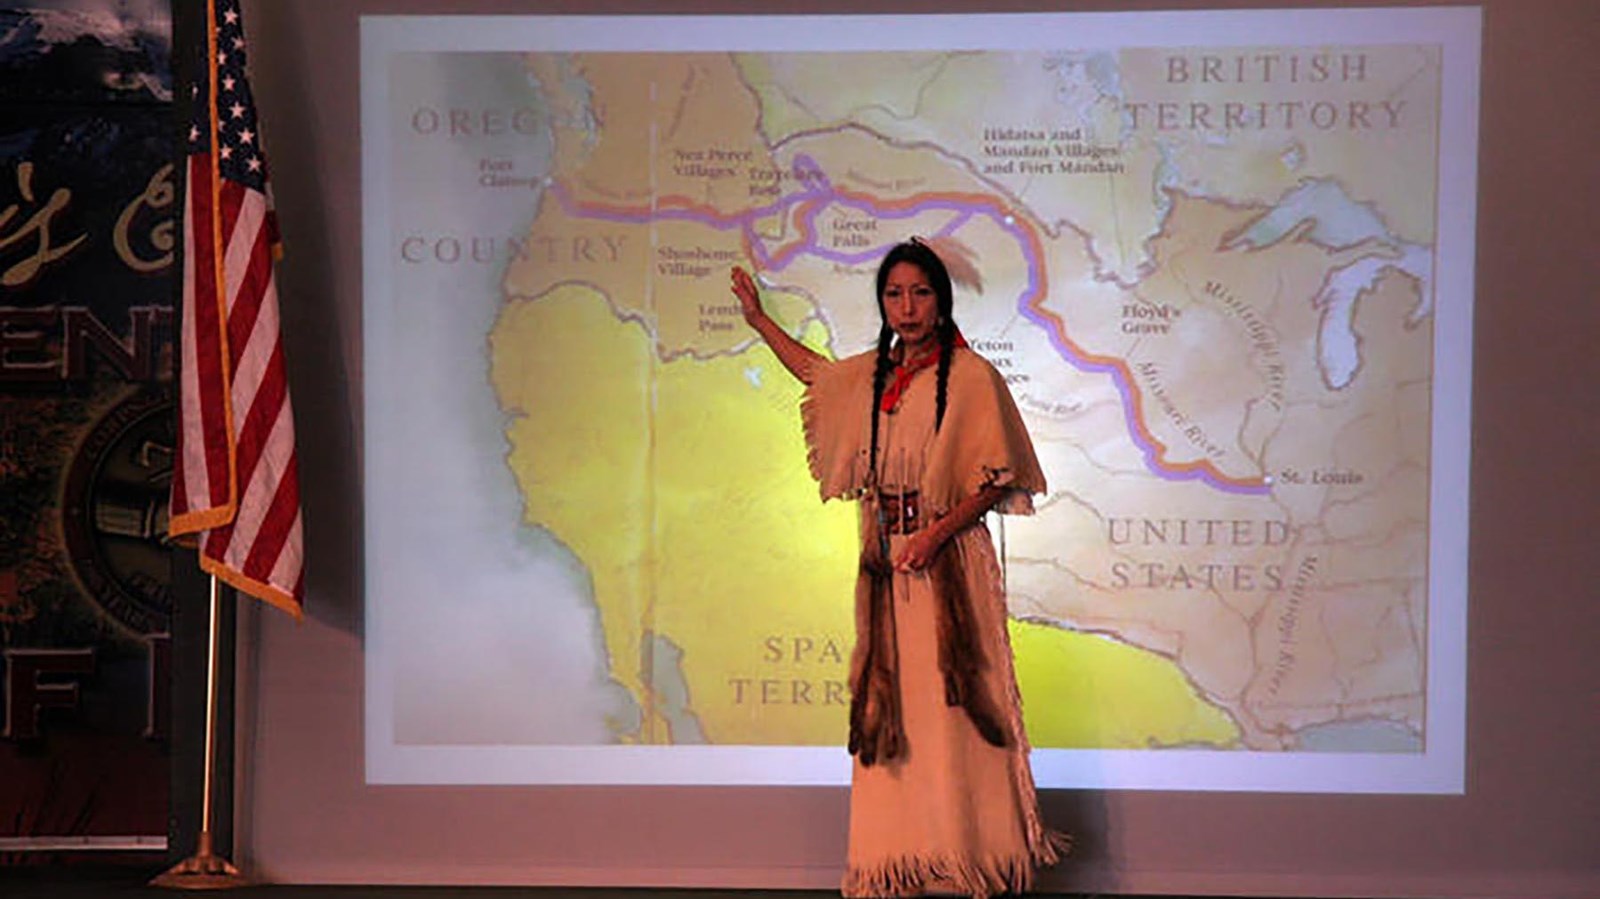 Woman in Native American attire stands on stage in front of screen pointing at a location on a map. 